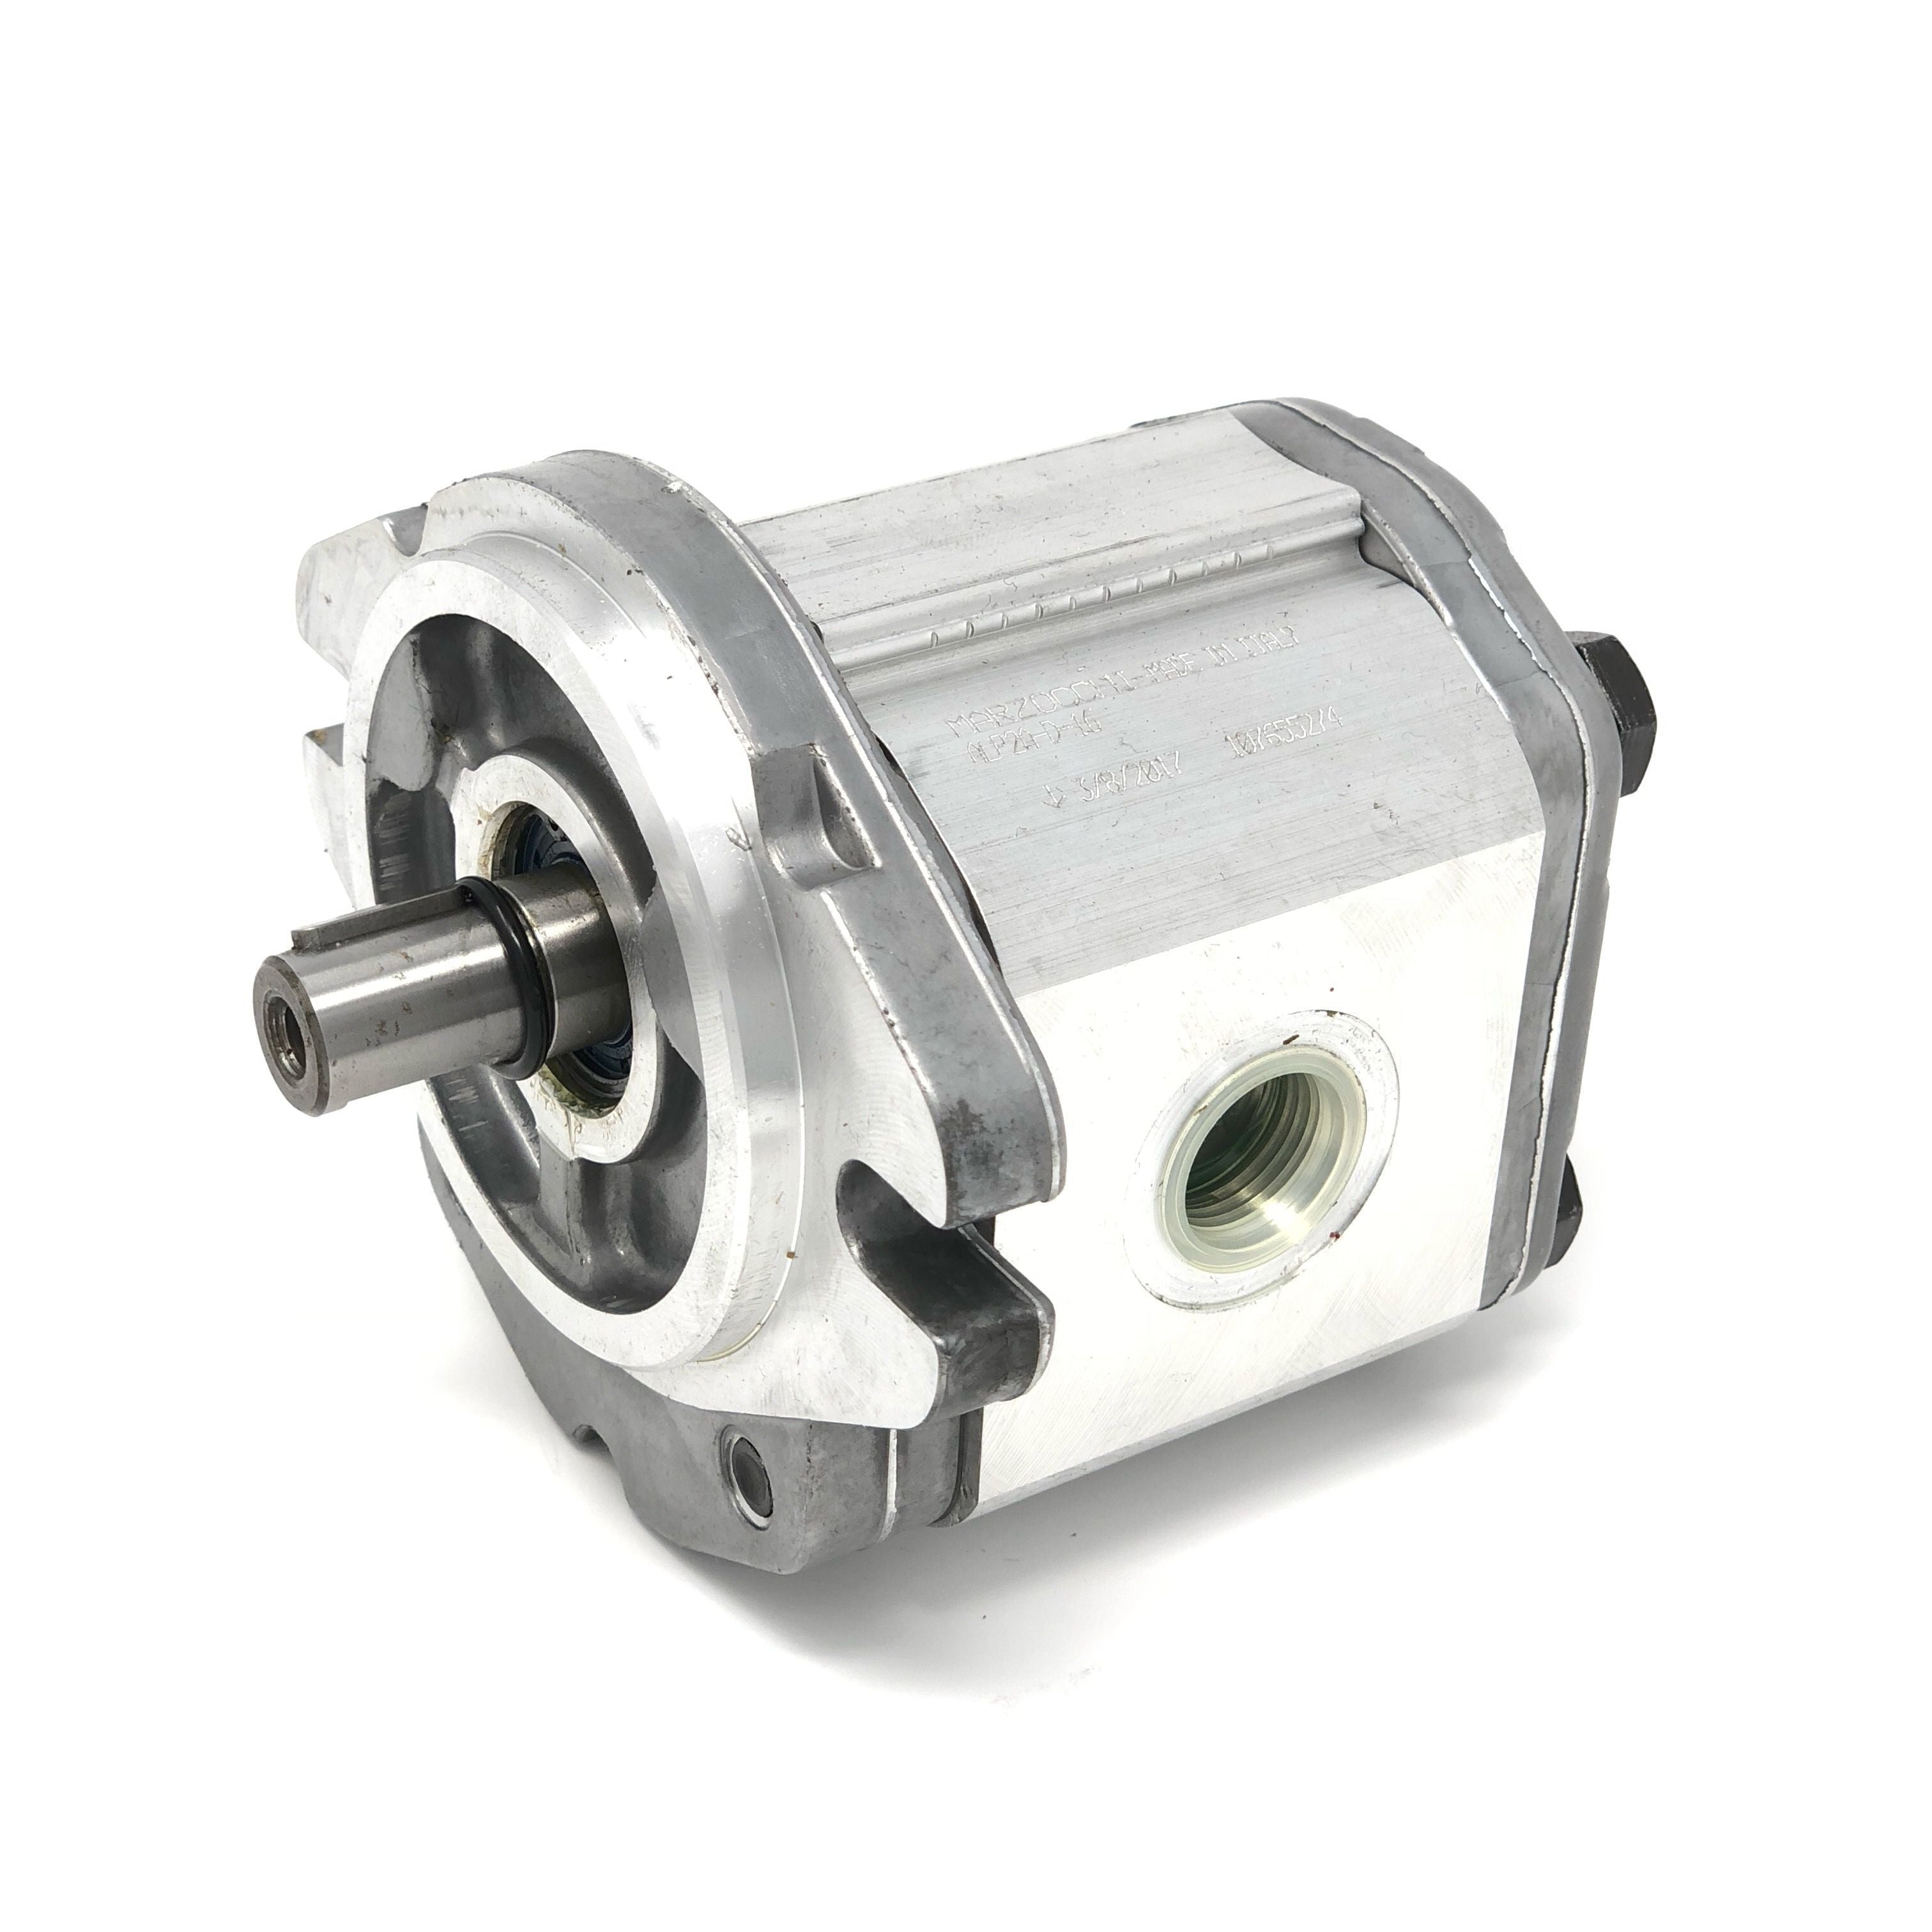 ALP2A-D-10 : Marzocchi Gear Pump, CW, 7cc (0.427in3), 3.33 GPM, 3625psi, 4000 RPM, #12 SAE (3/4") In, #10 SAE (5/8") Out, Keyed Shaft 5/8" Bore x 5/32" Key, SAE A 2-Bolt Mount